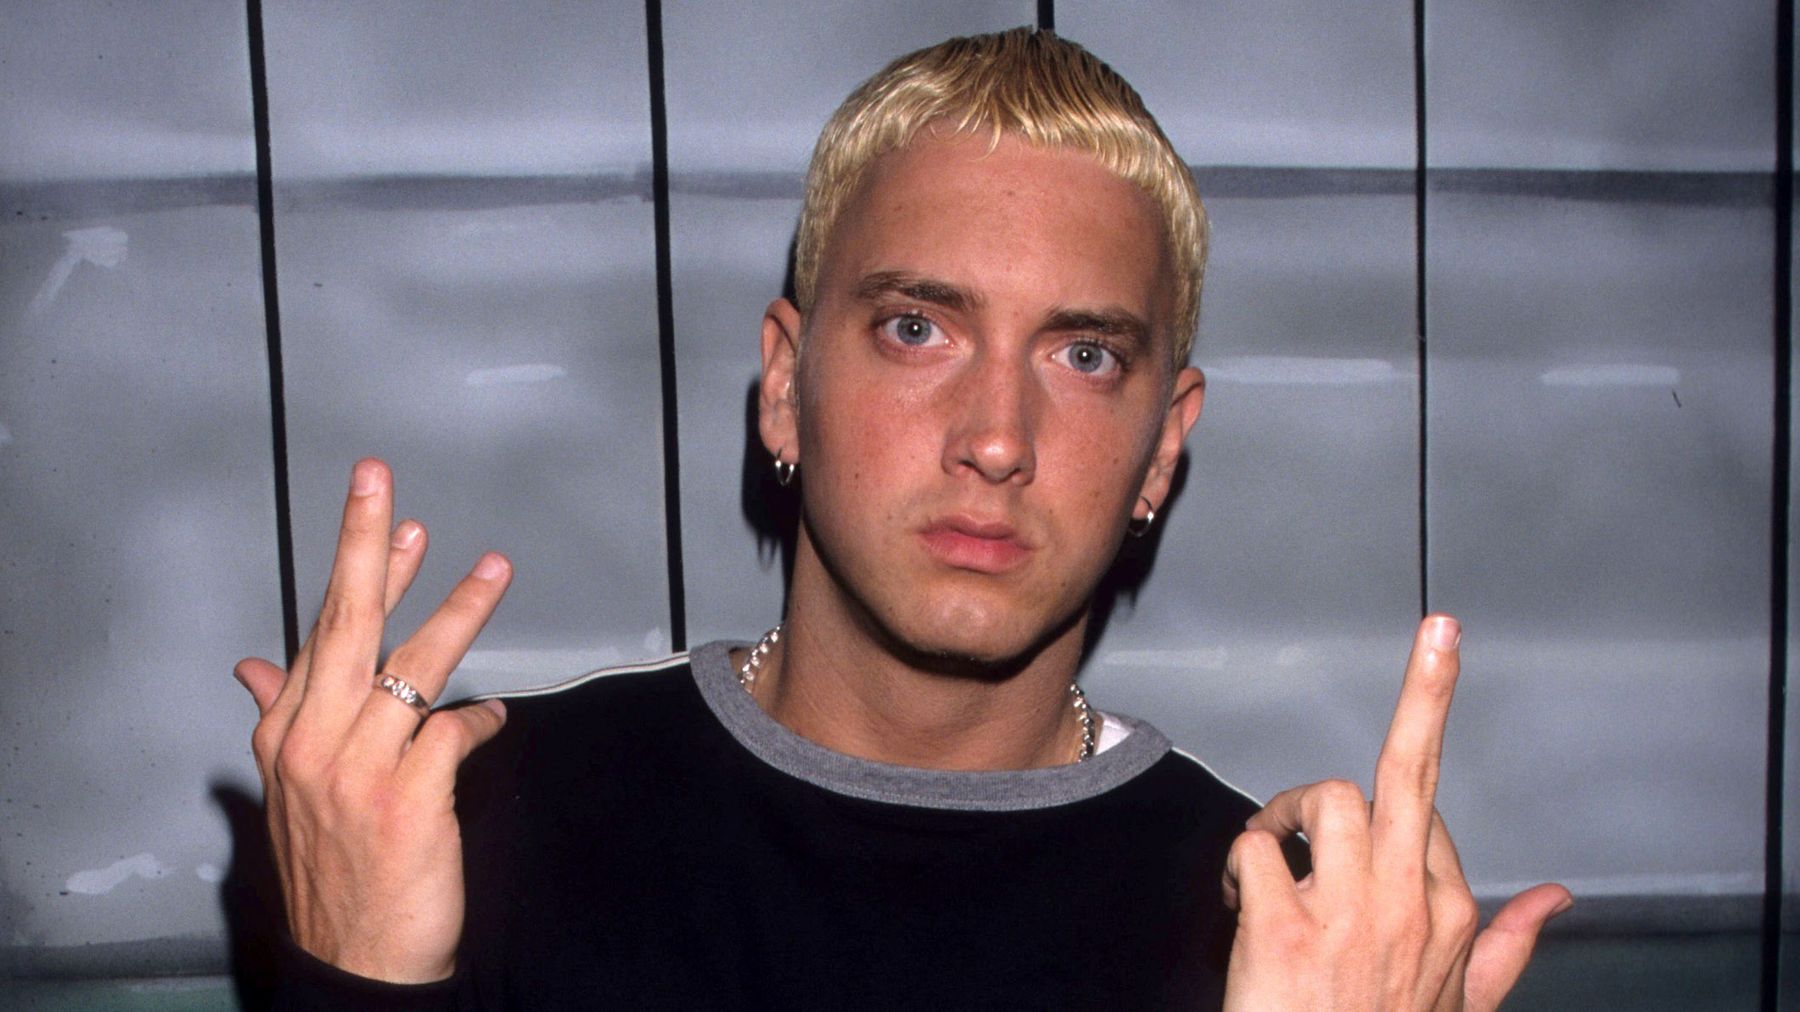 Hear Eminem Like You've Never Heard Him Before - Rapping Over Street Fighter Beats